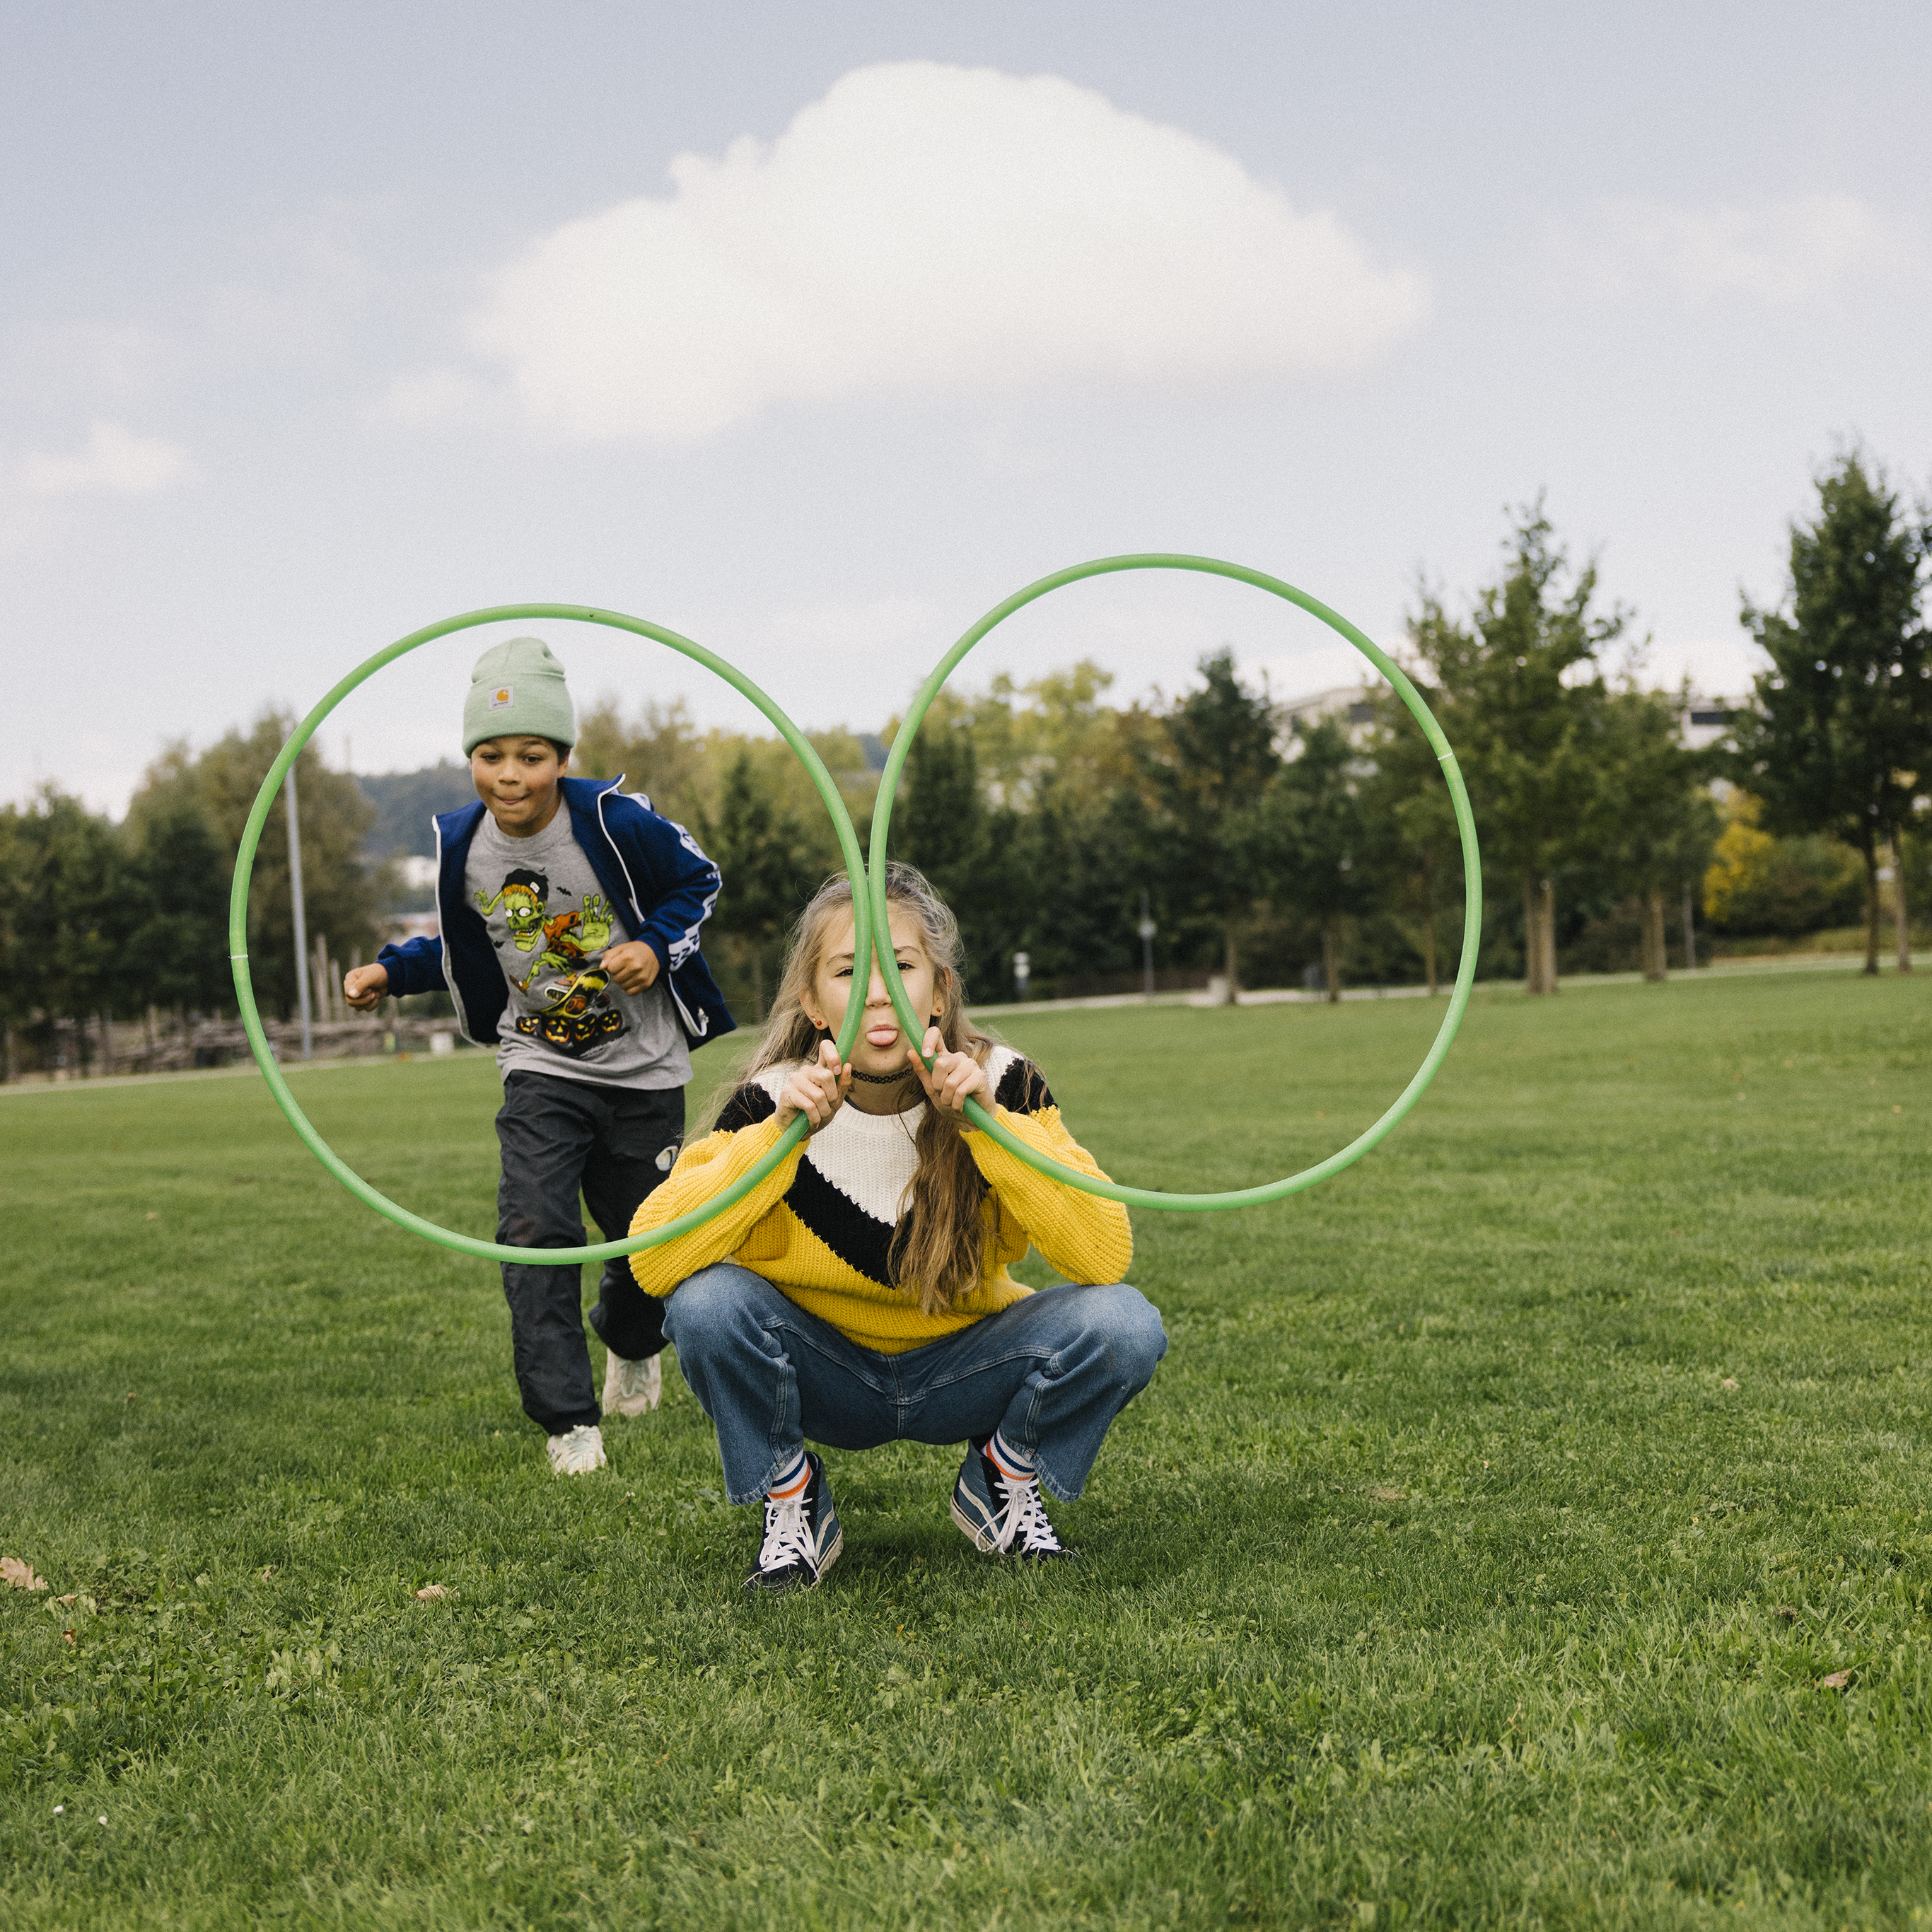 A teenager holds two hula hoops in front of her face like glasses, sticking out her tongue, while a teenager comes running to jump through one of the rings.